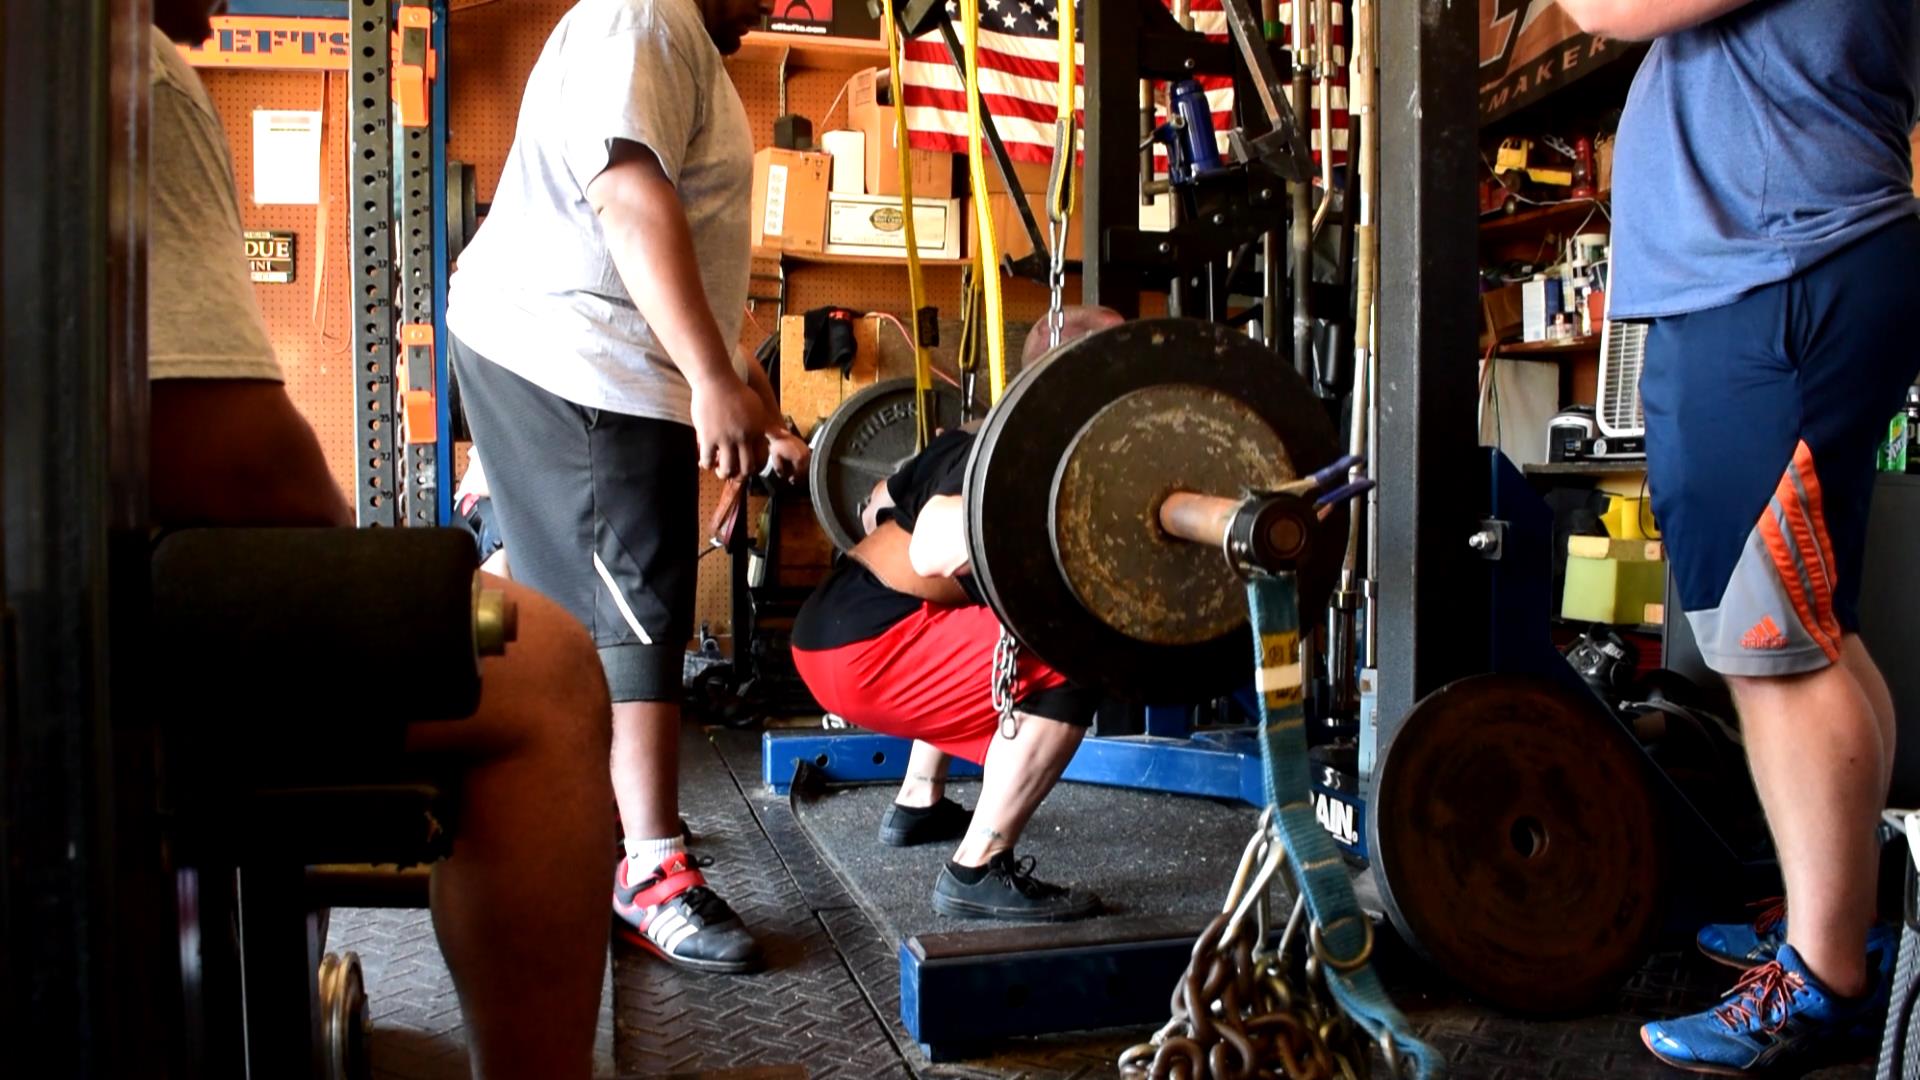 Dynamic Effort Lower: Back To Speed Squats and Pulls